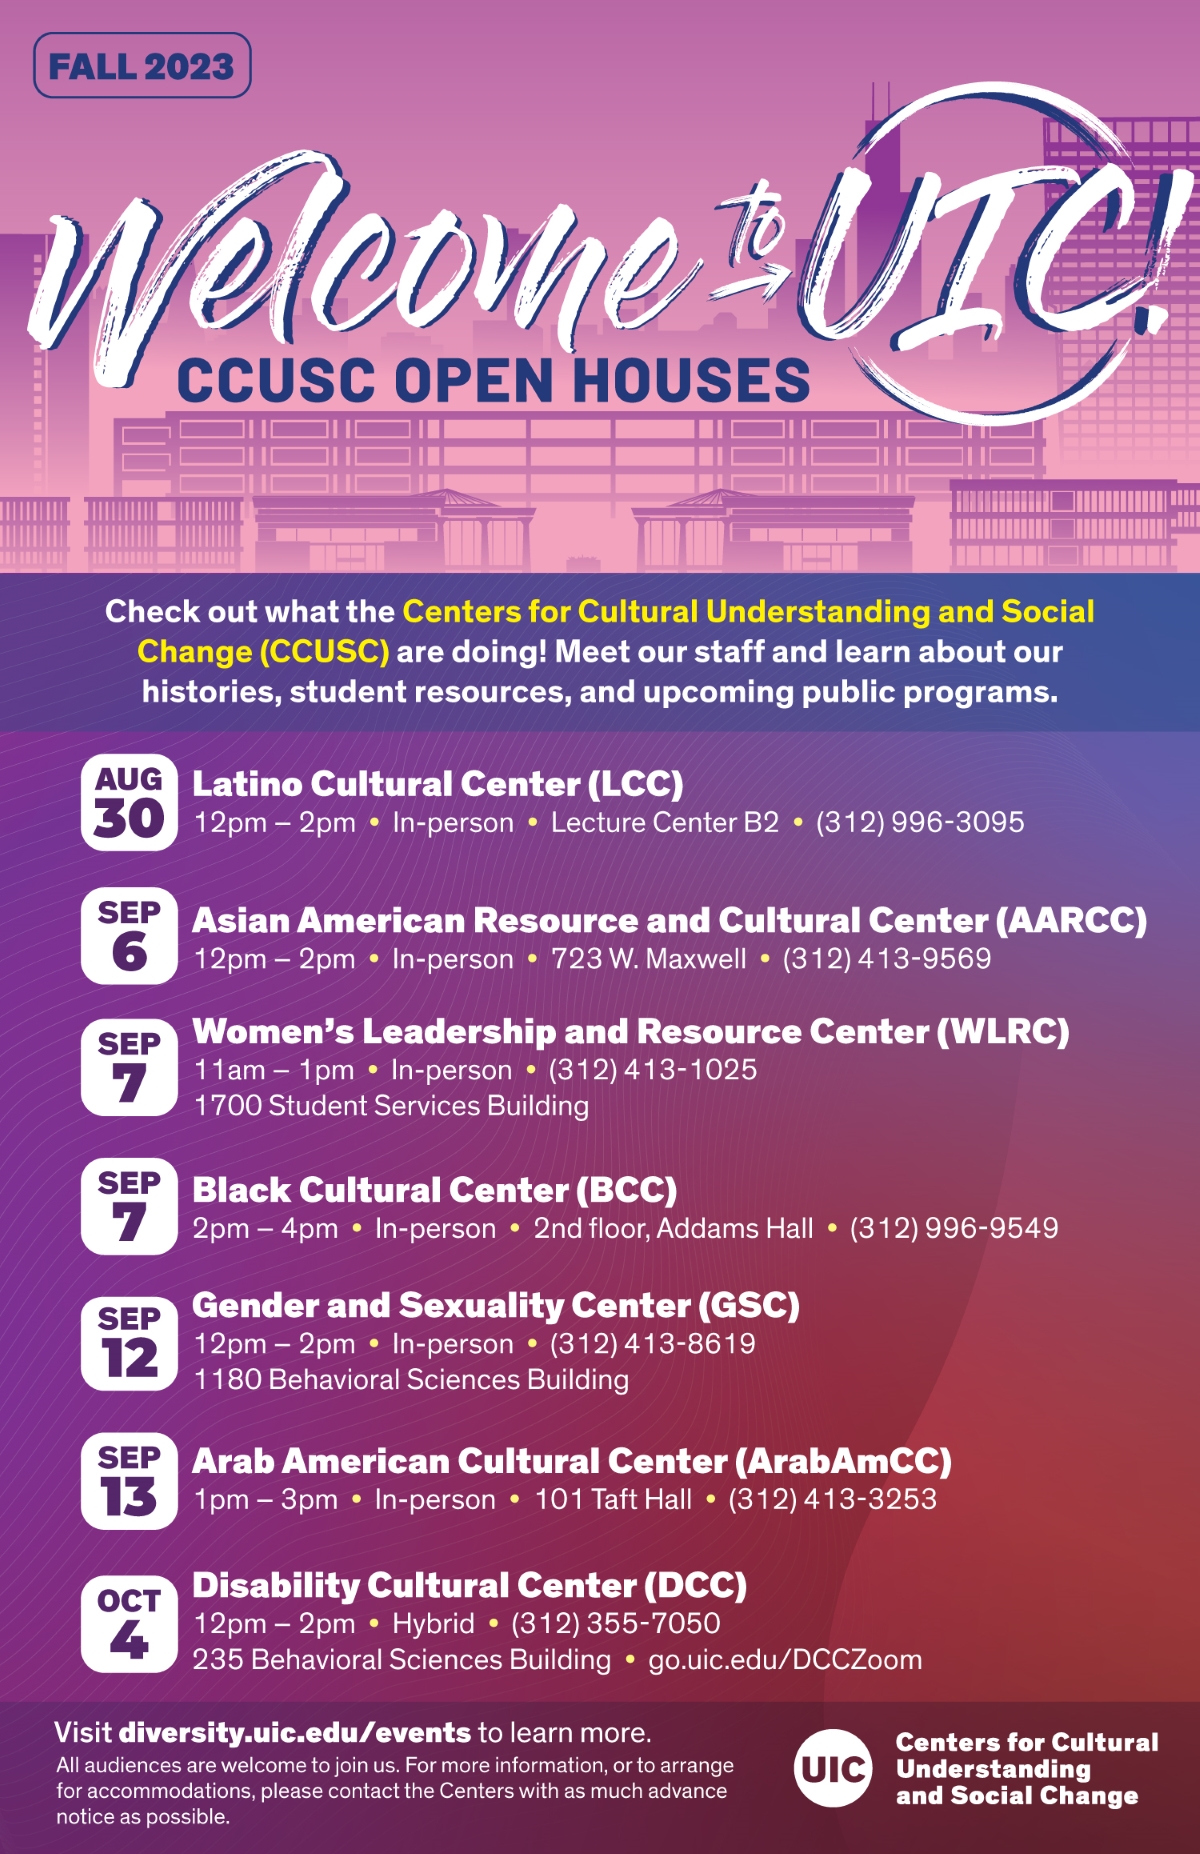 to UIC! CCUSC Fall 2023 Open Houses Office of Community